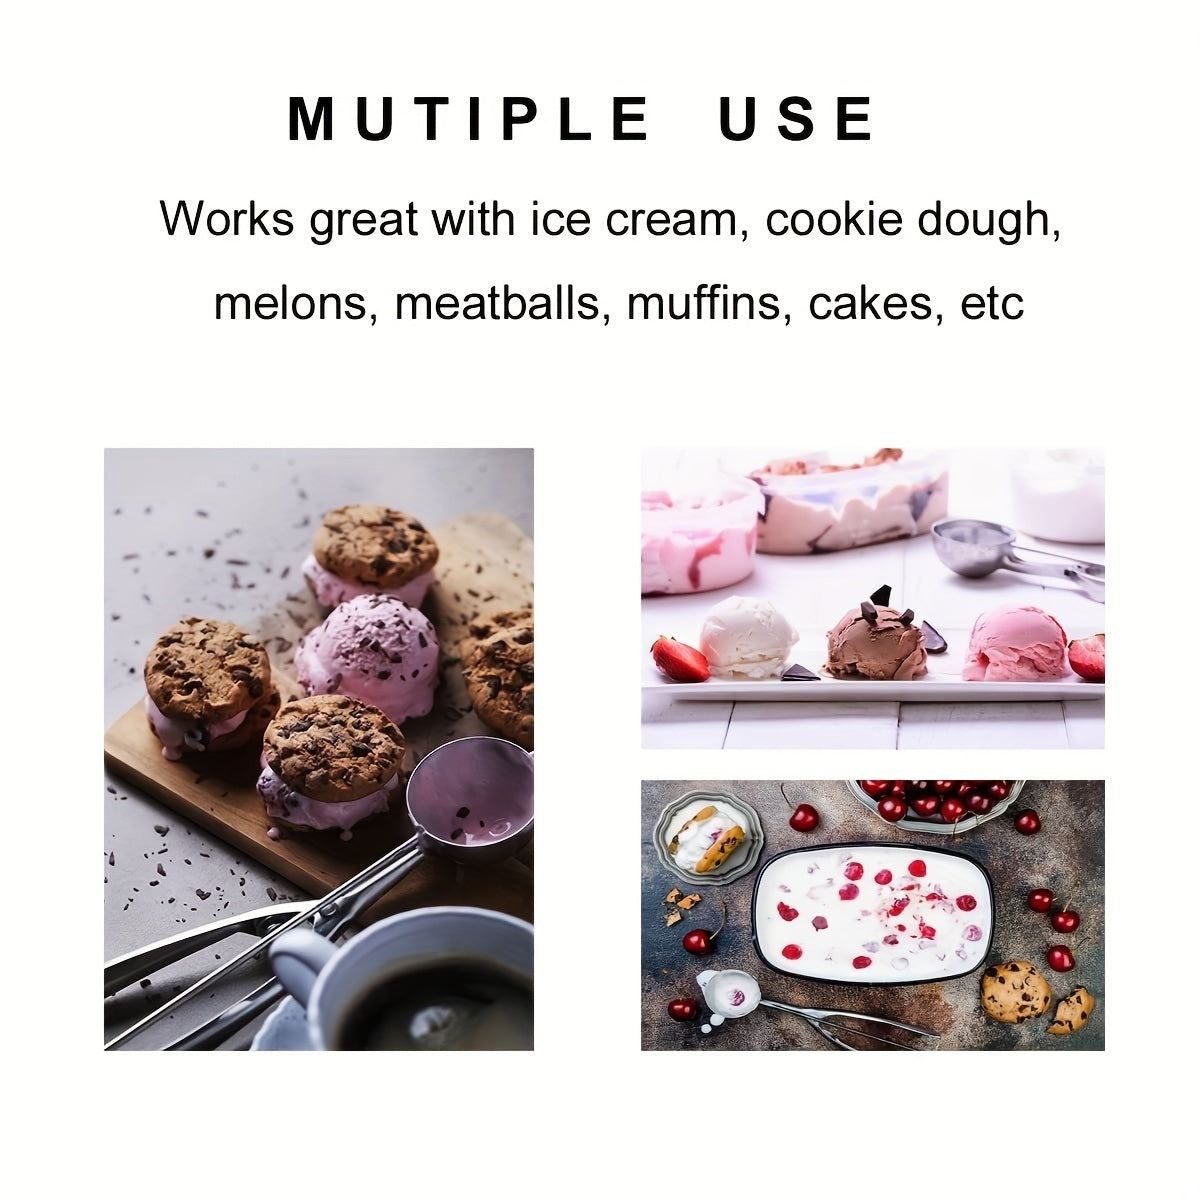 A 3pcs Cookie Scoop Set, Stainless Steel Ice Cream Scooper With Trigger Release, Large/Medium/Small Cookie Scooper For Baking, Cookie Scoops For Baking Set Of 3 With Cookie with intricate details on a white background.